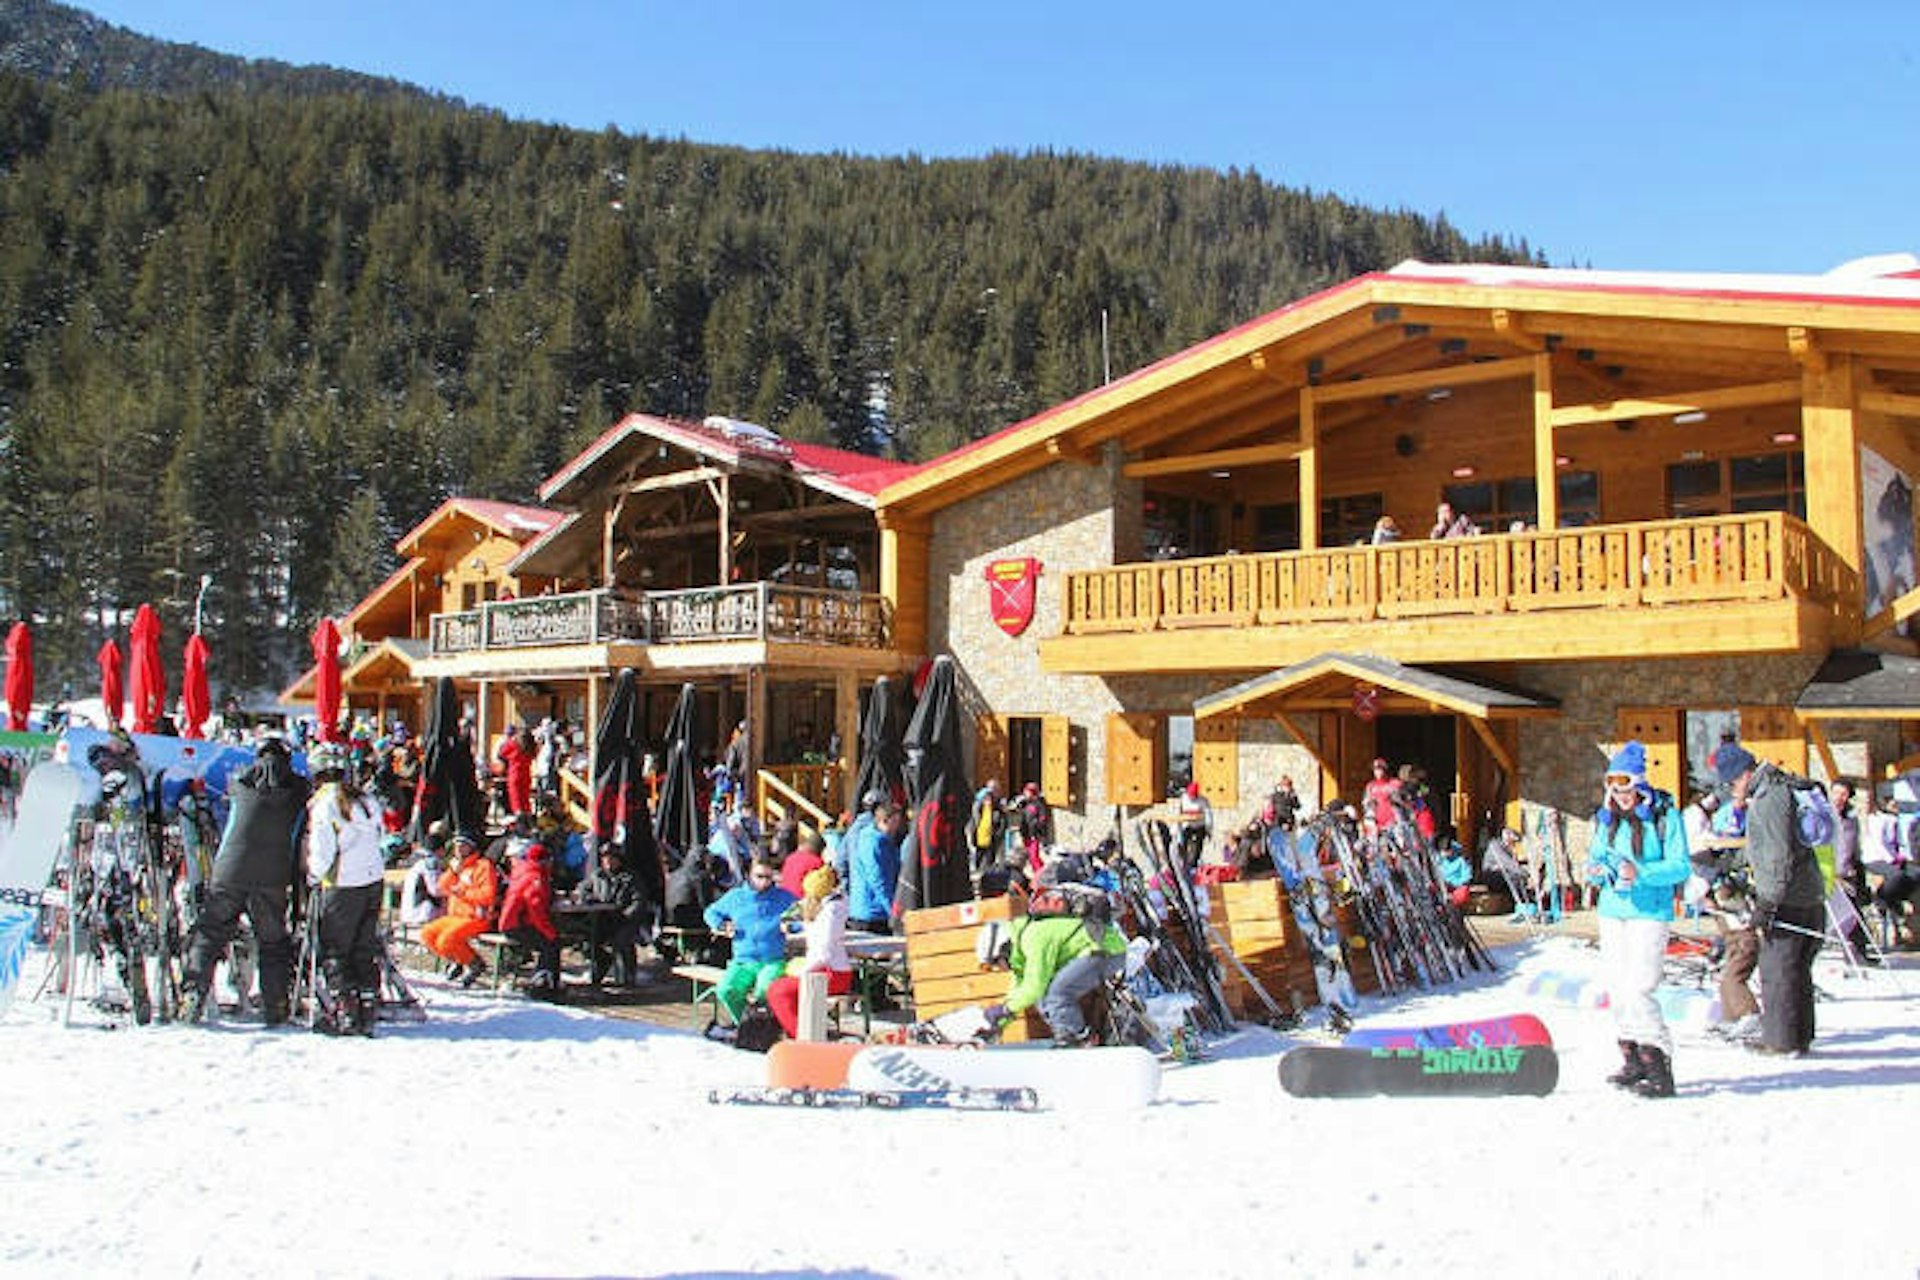 Three wooden chalet-style buildings with many people wearing colourful ski gear gathered in front